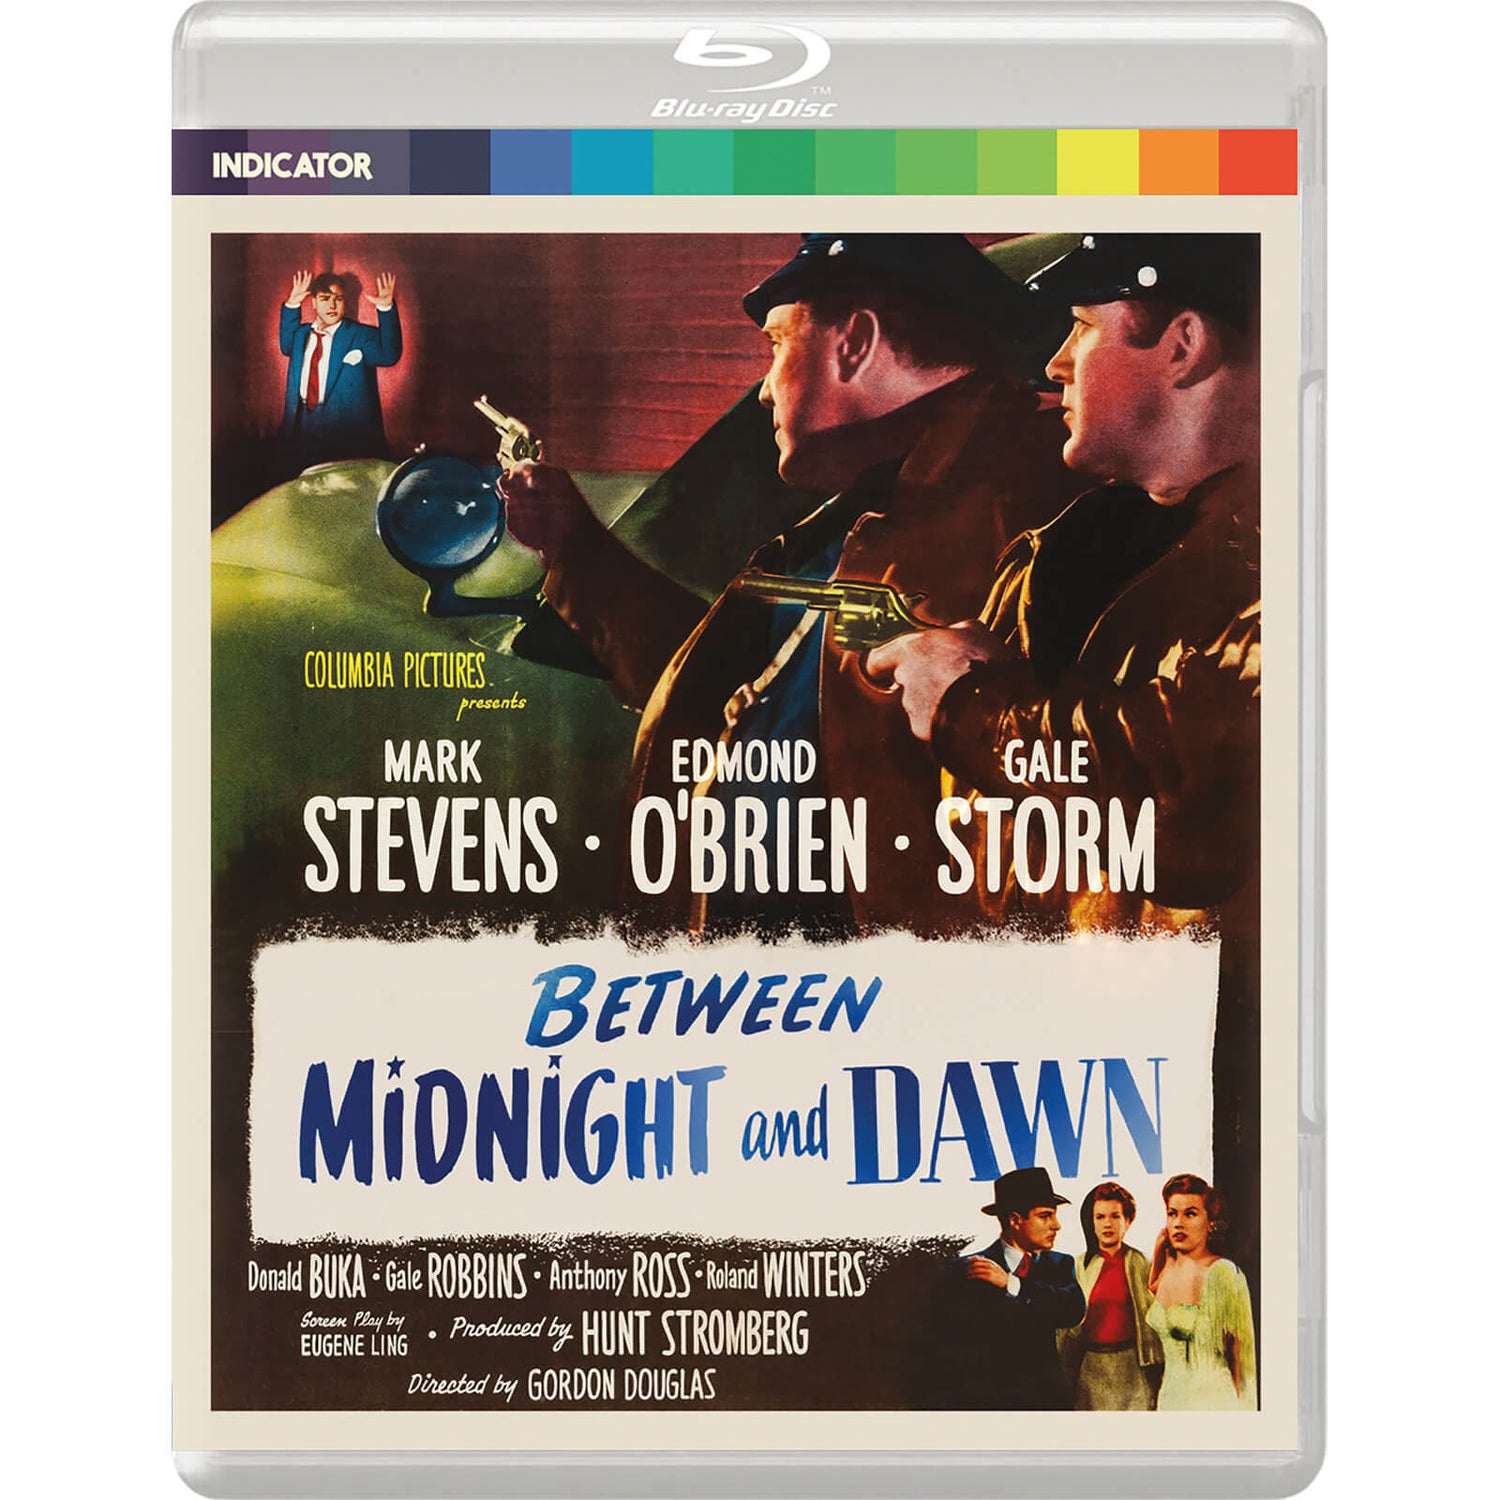 Between Midnight and Dawn (Standard Edition)